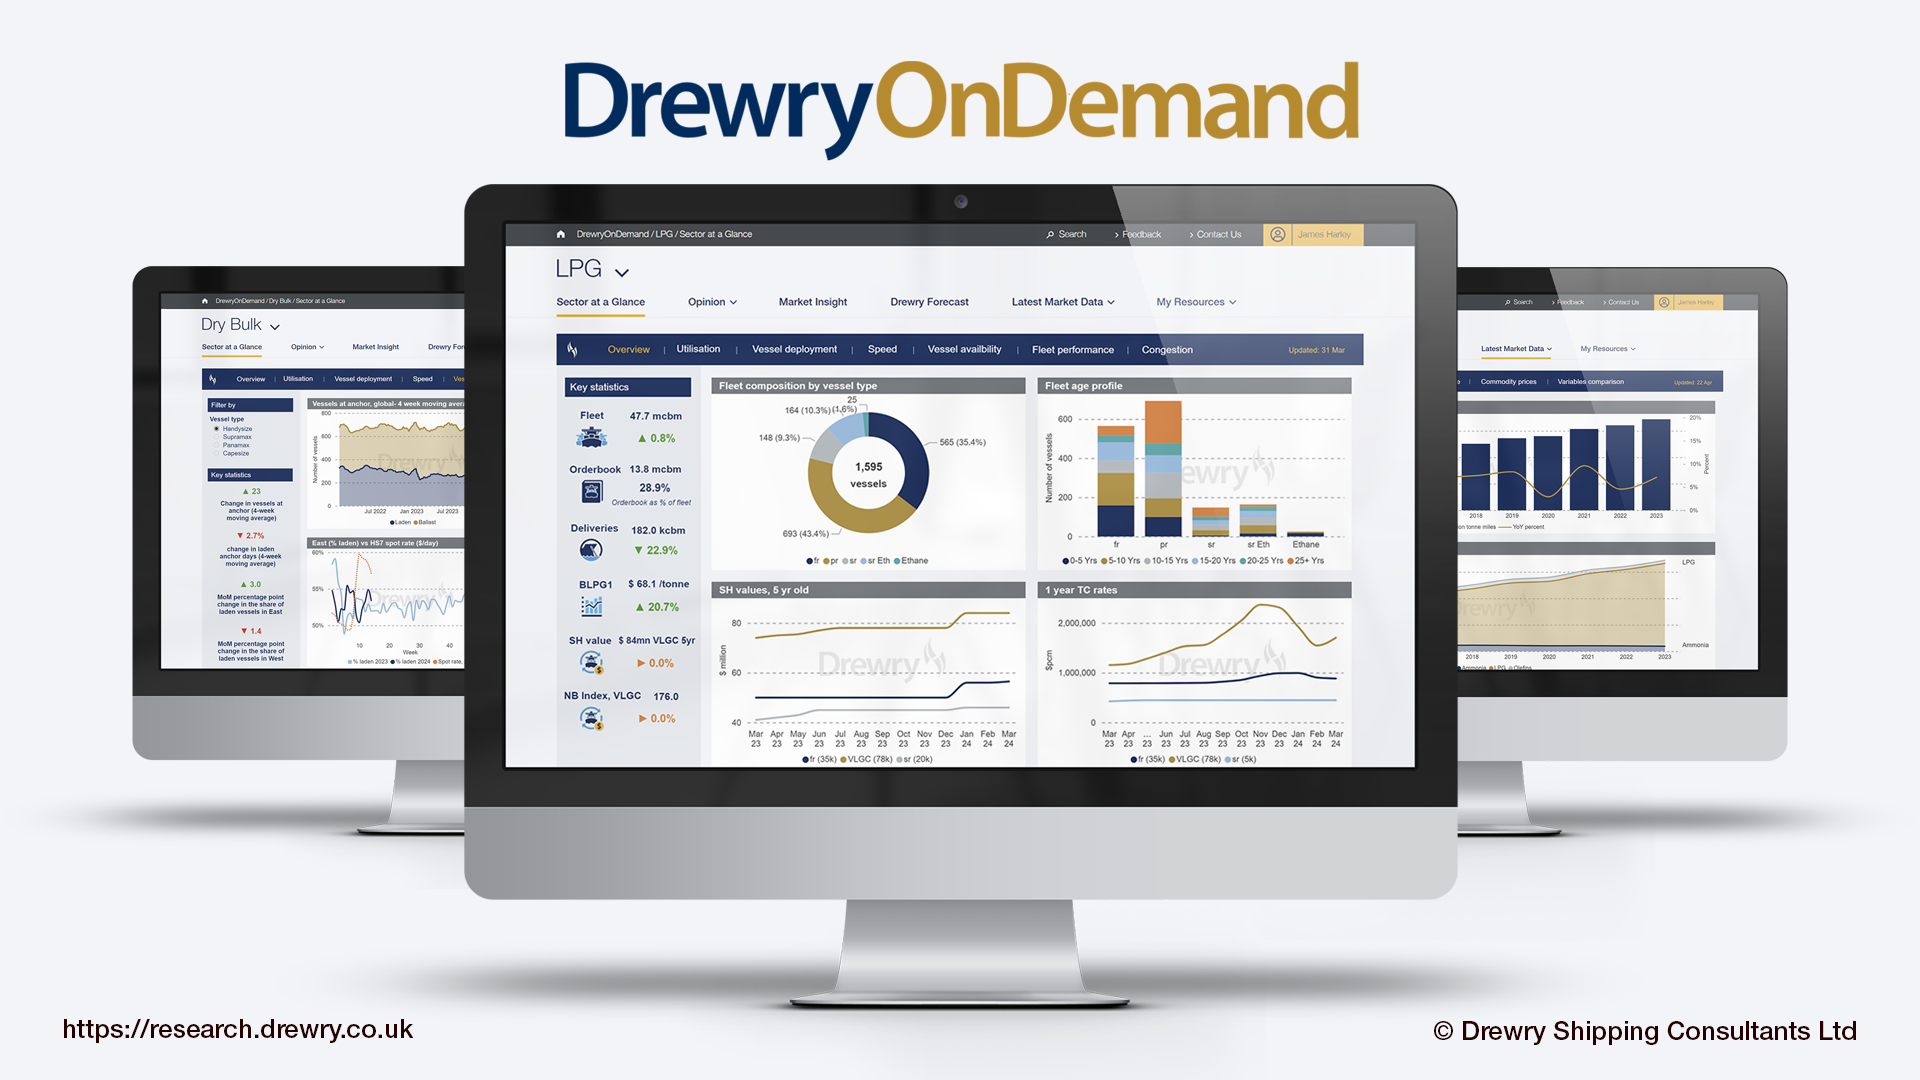 Drewry launches OnDemand - fully-integrated online Maritime Research Knowledge Centre